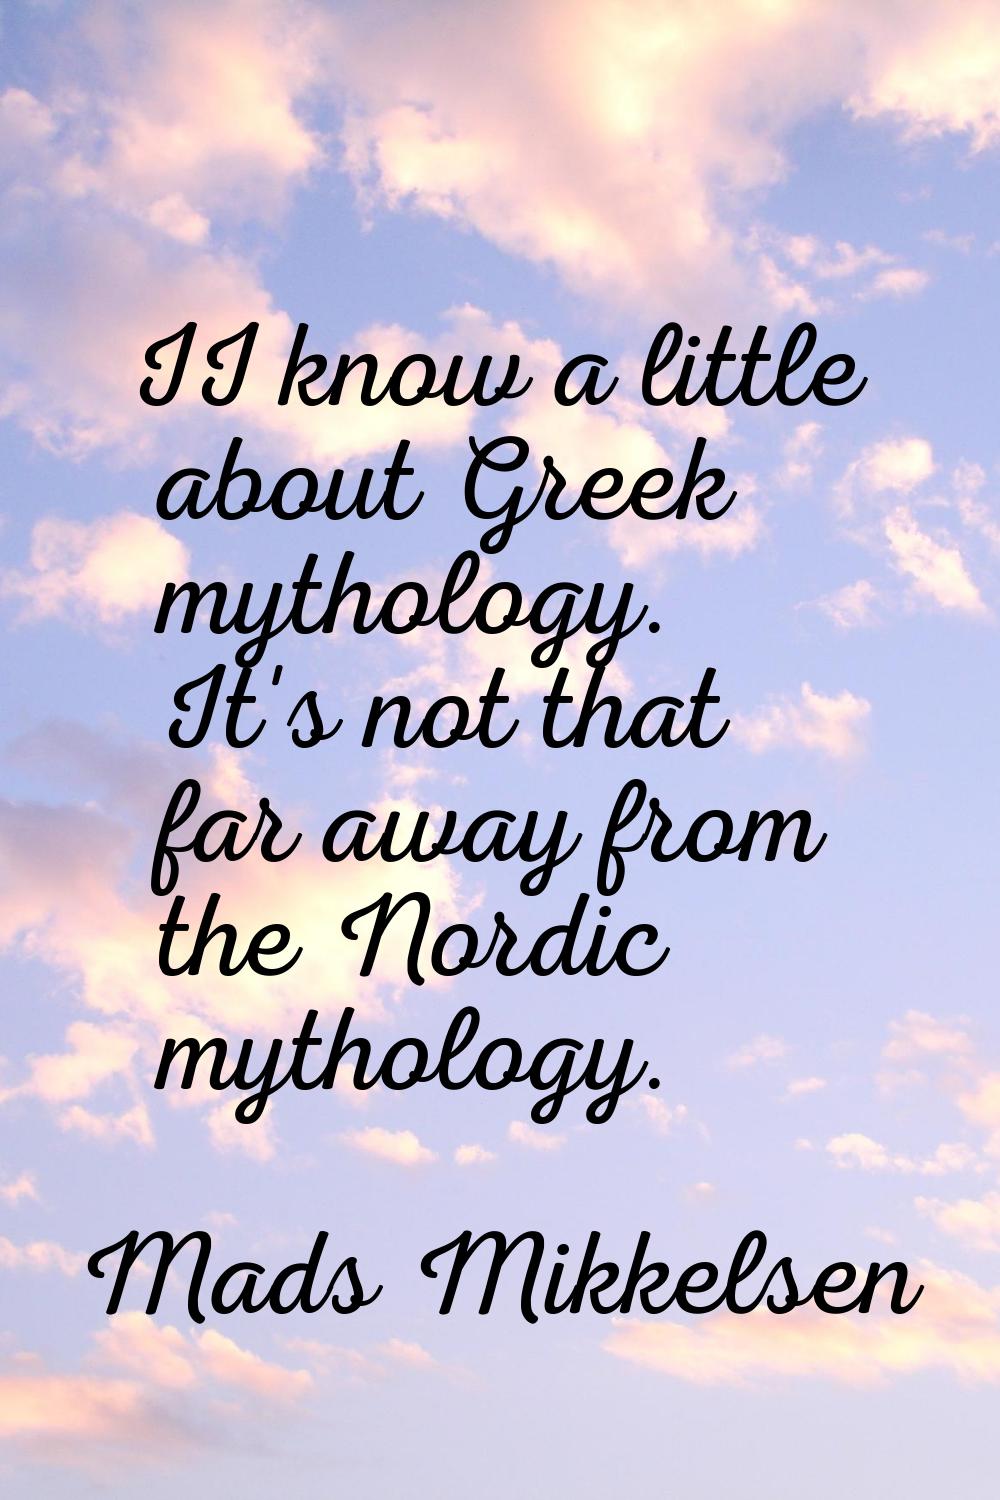 II know a little about Greek mythology. It's not that far away from the Nordic mythology.